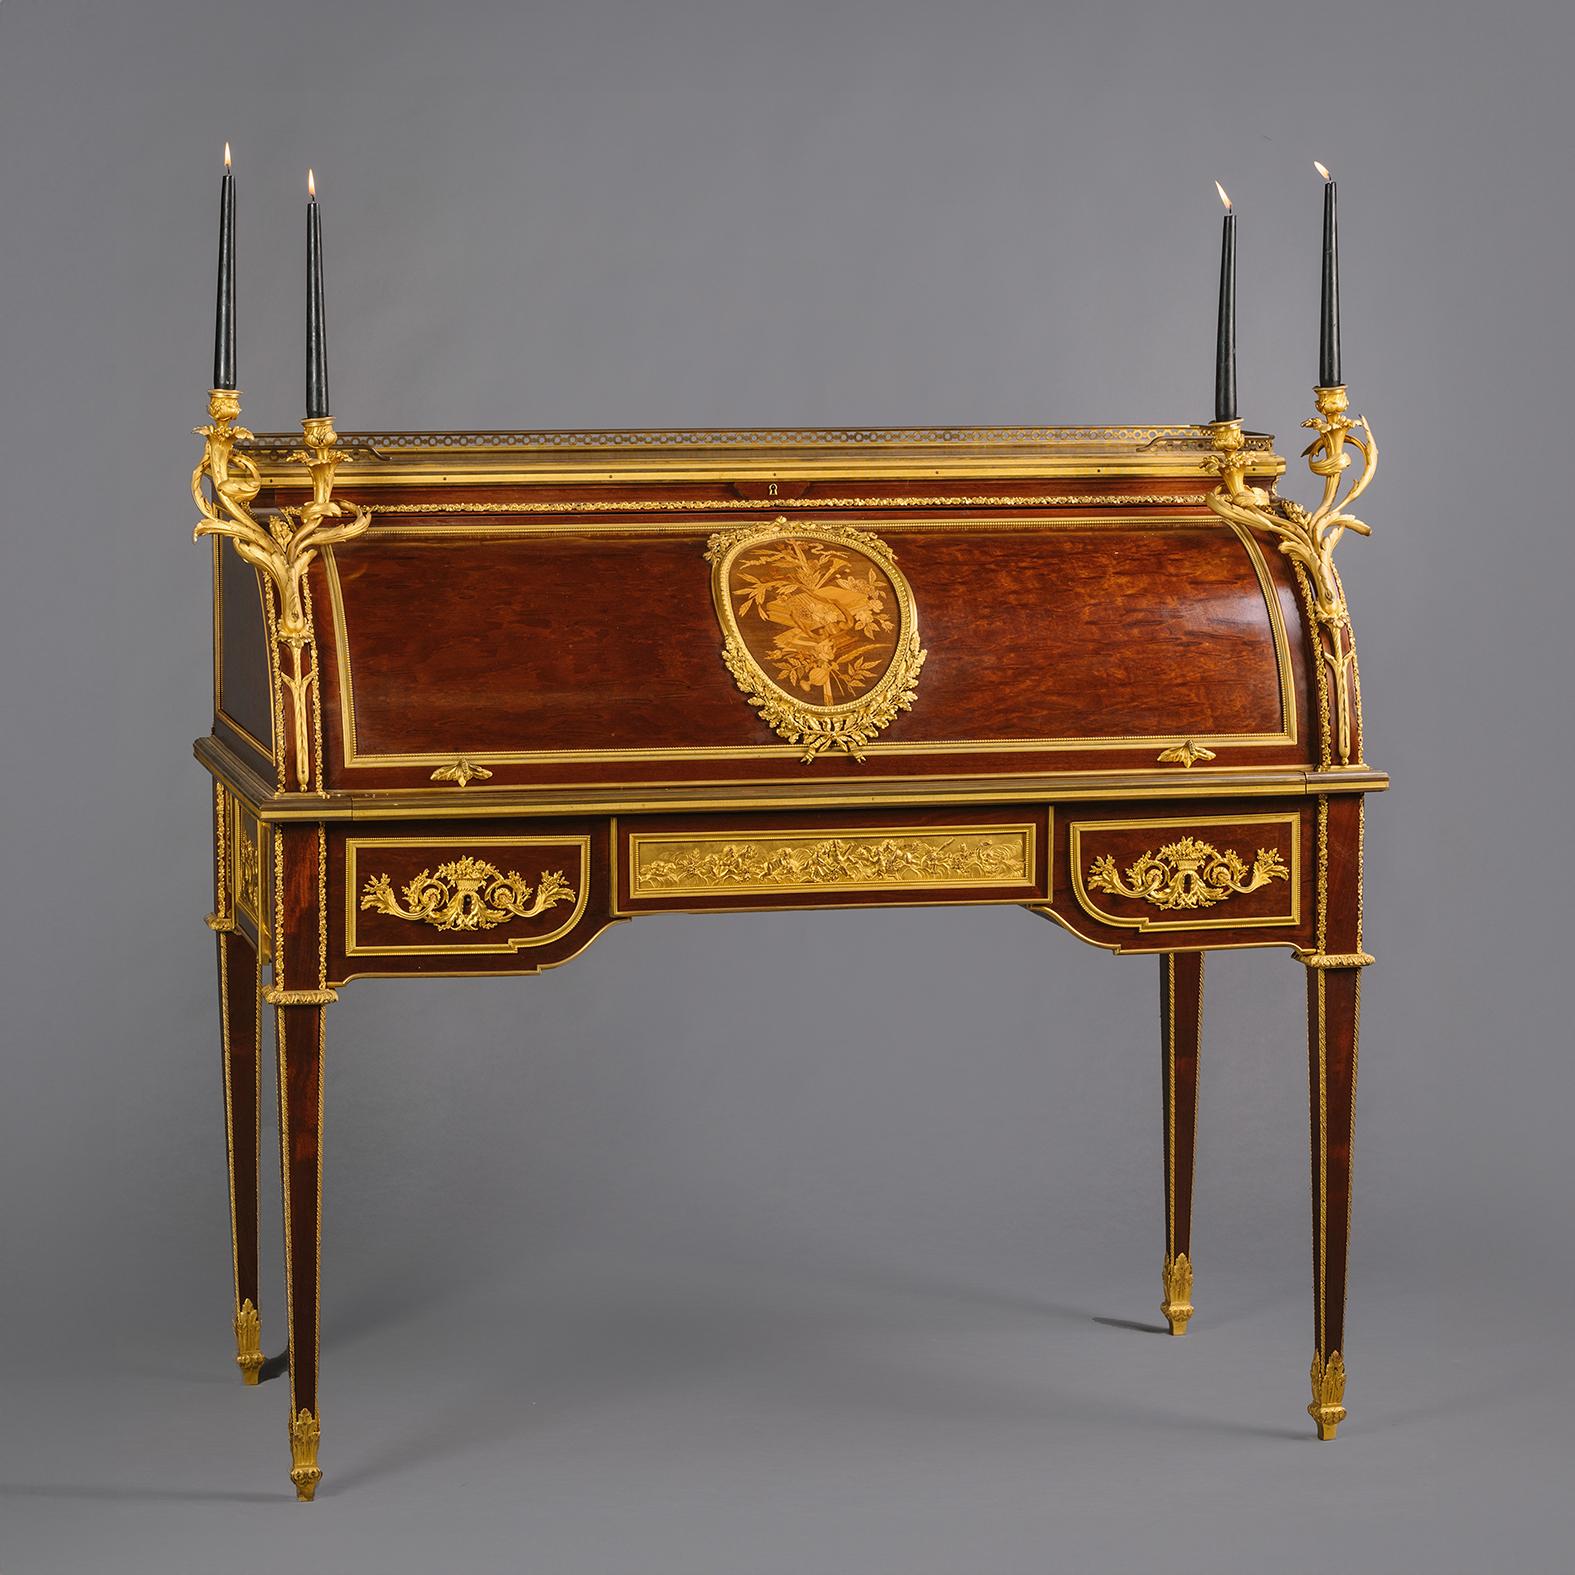 A Rare Louis XVI Style Gilt-Bronze Mounted Mahogany Cylinder Bureau. By François Linke, Paris. Index Number 100. France, Circa 1890.

The top with three quarter pierced gallery. The cylinder front centred by a gilt-bronze foliate framed oval